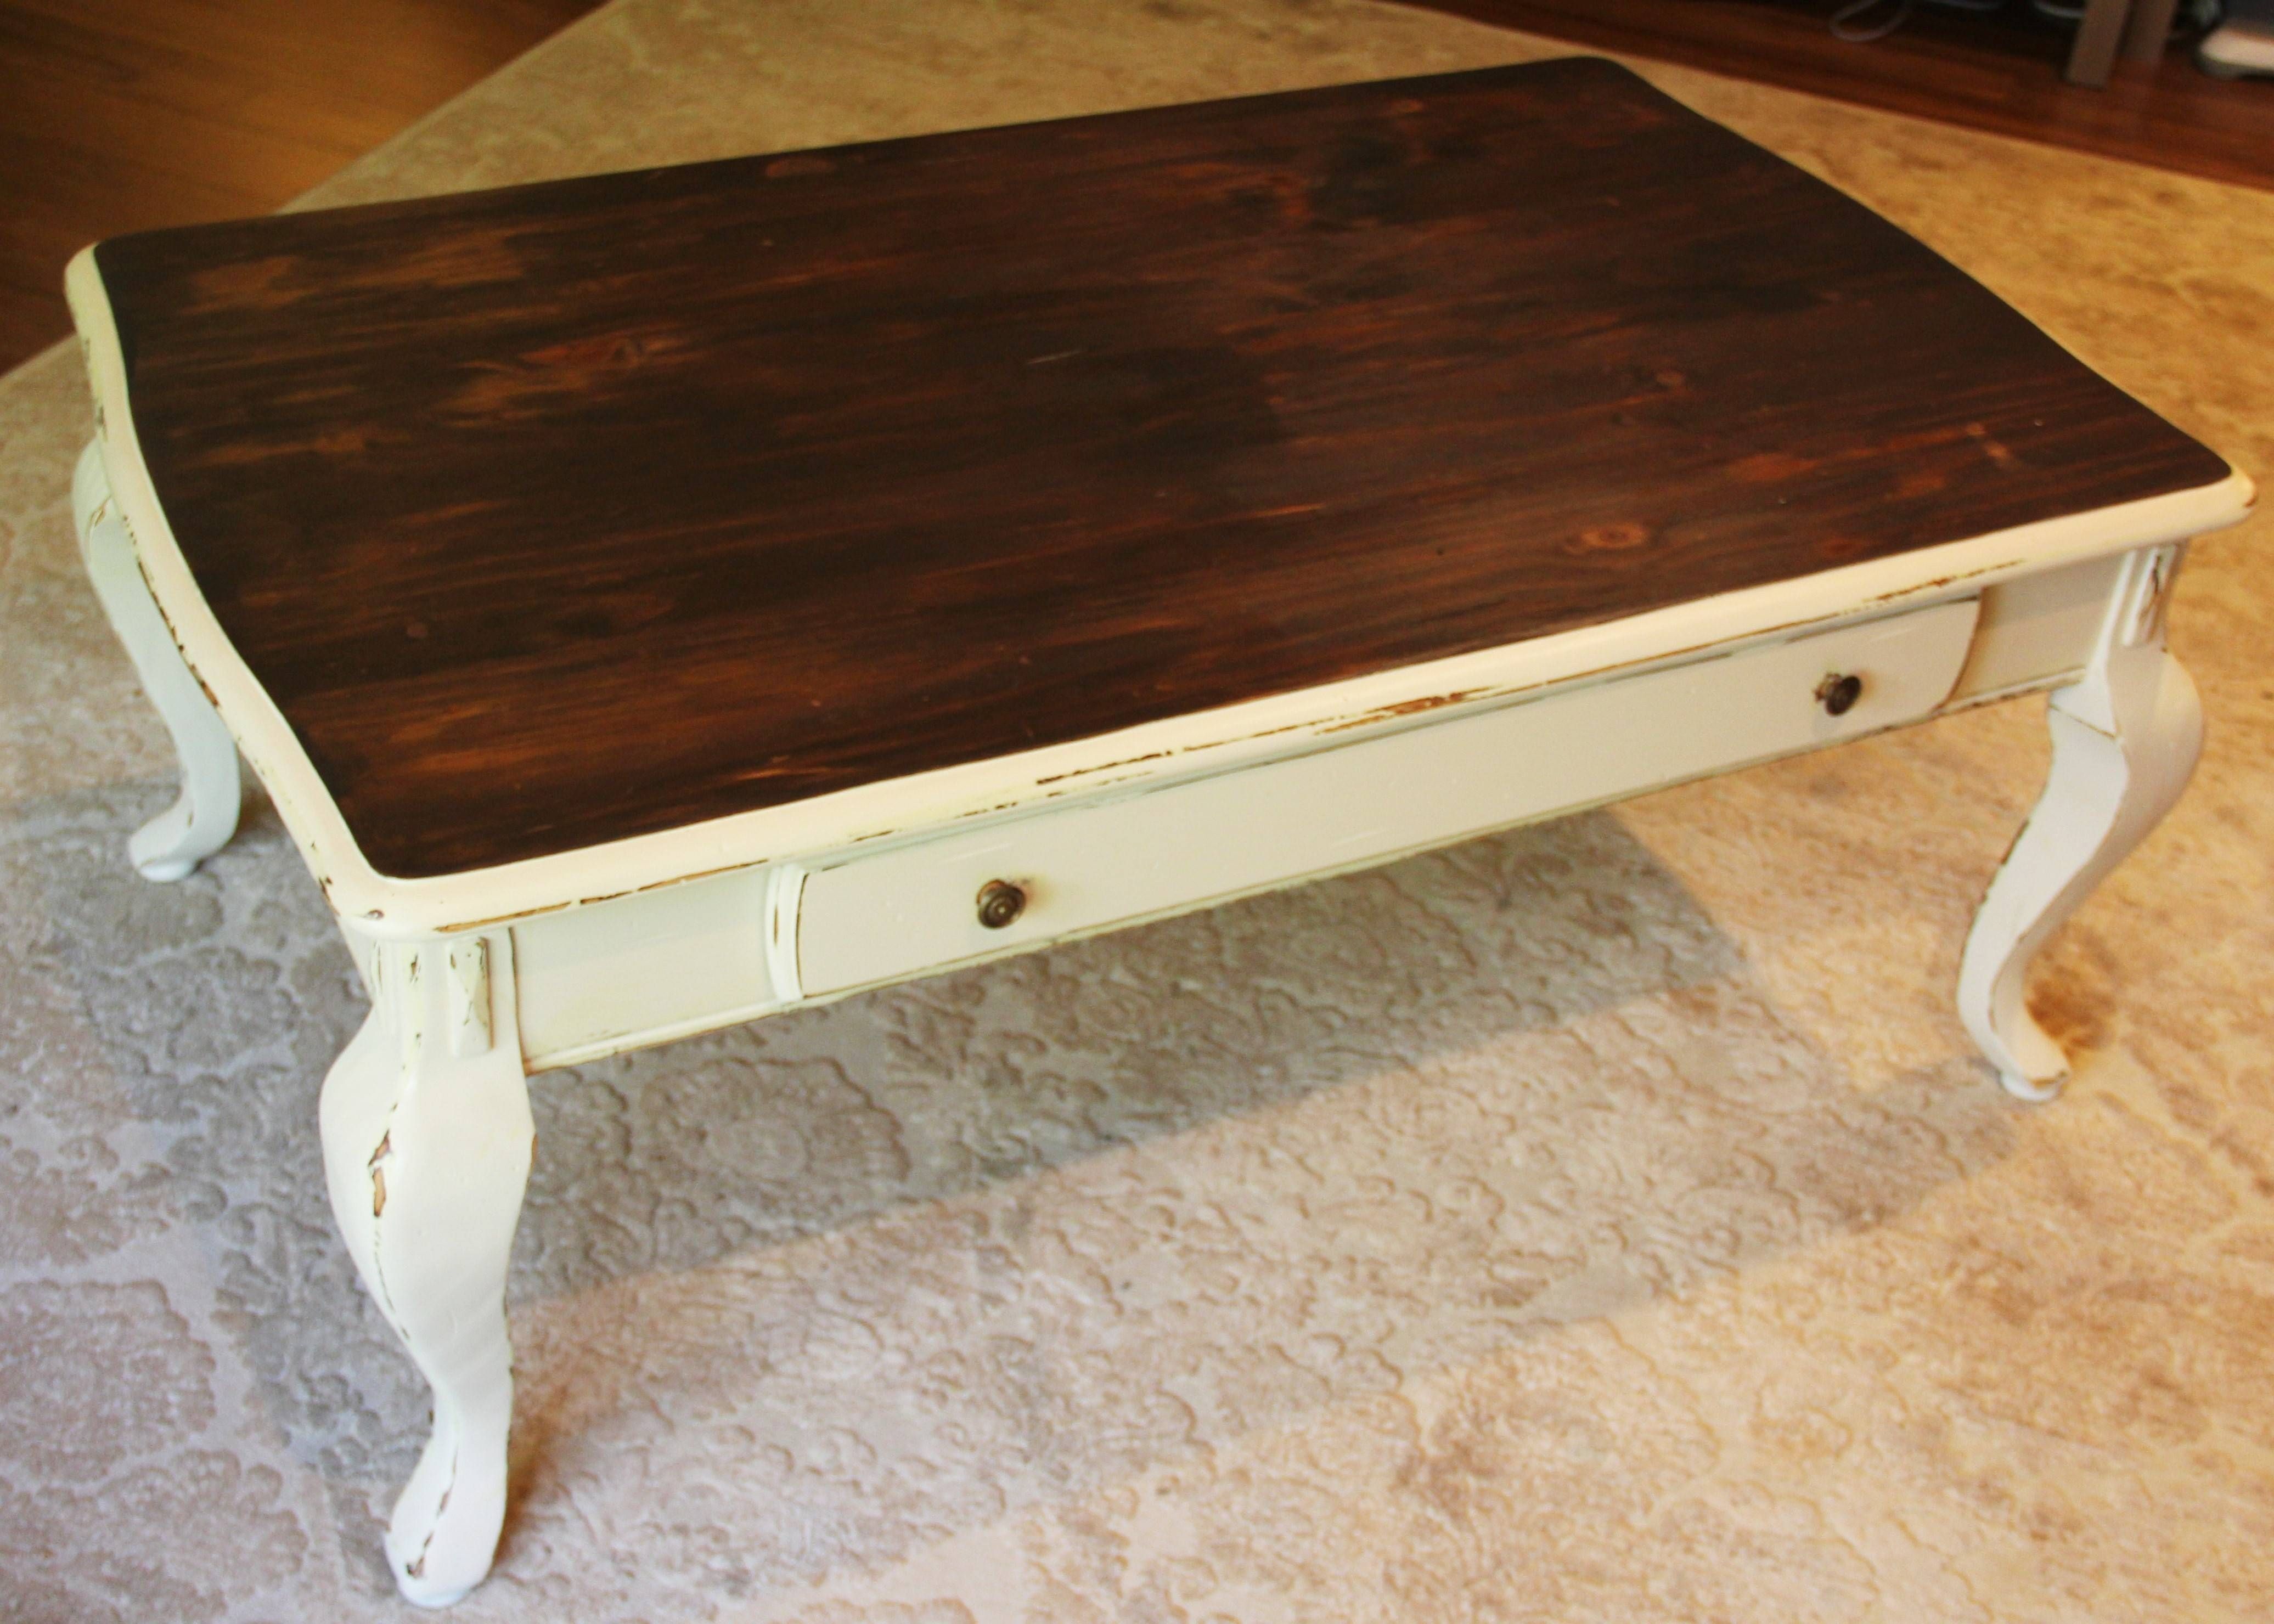 White Wooden Coffee Table With Drawer Under The Brown Wooden Pertaining To Cream Coffee Tables With Drawers (View 3 of 25)